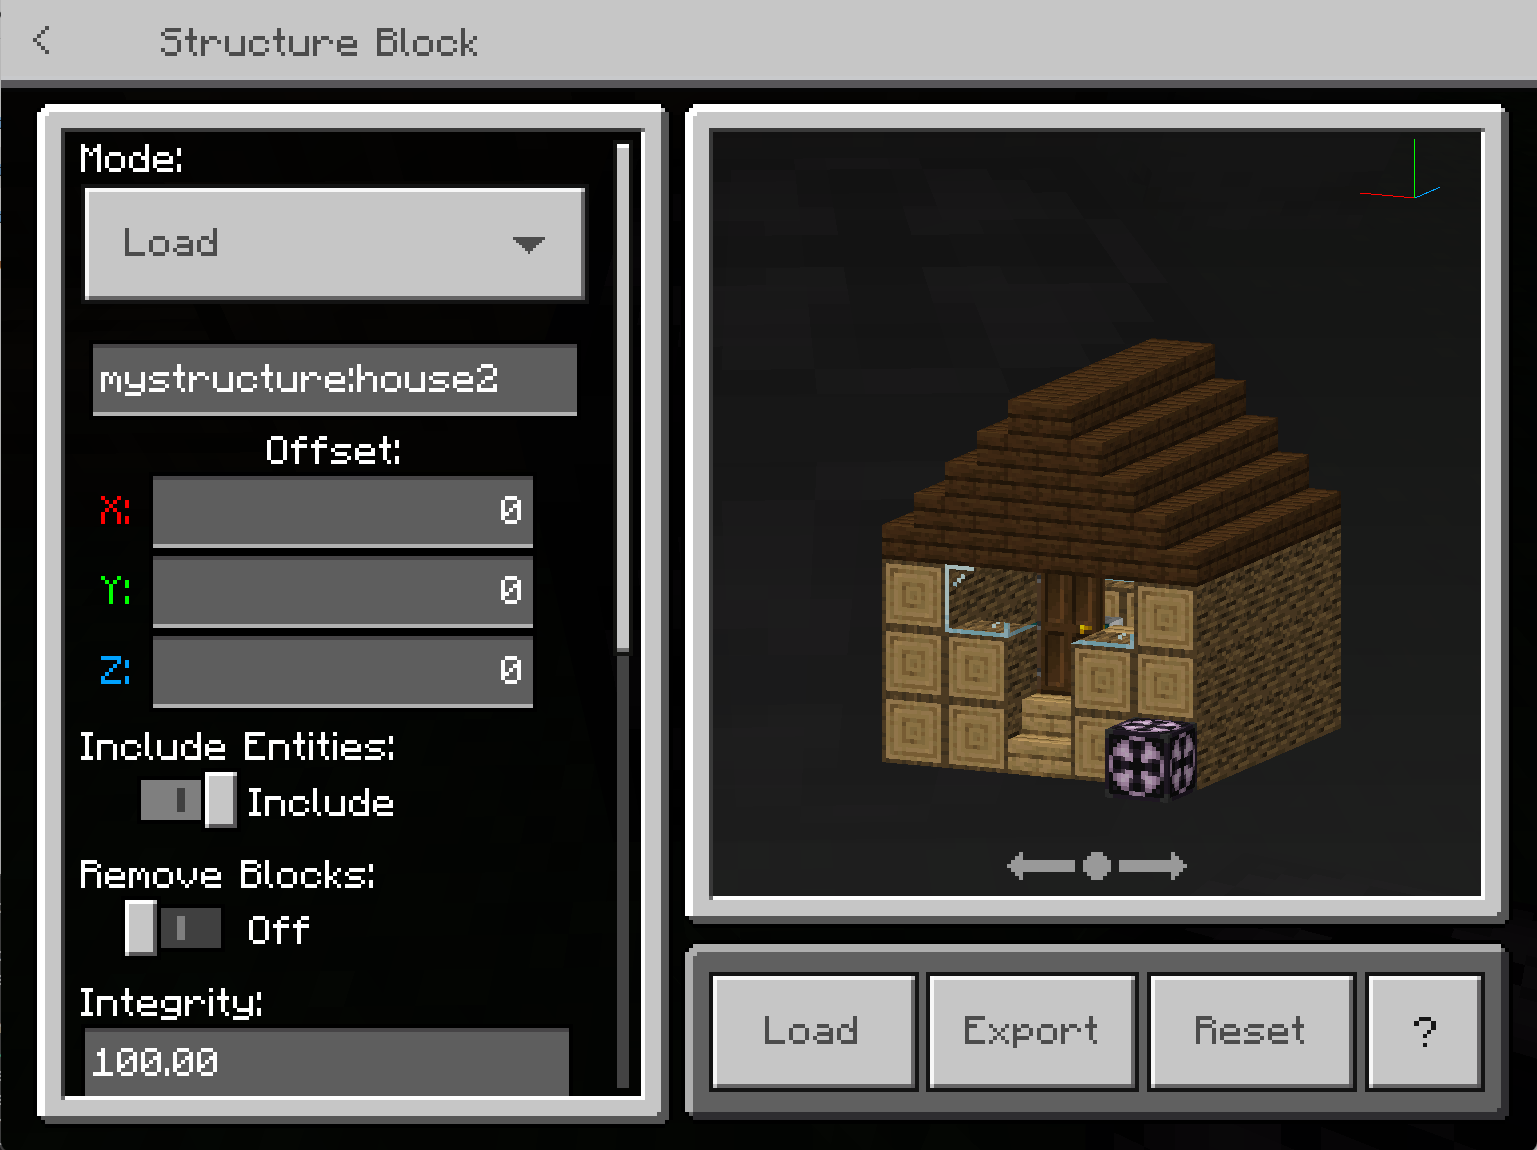 The structure block load screen with a log cabin